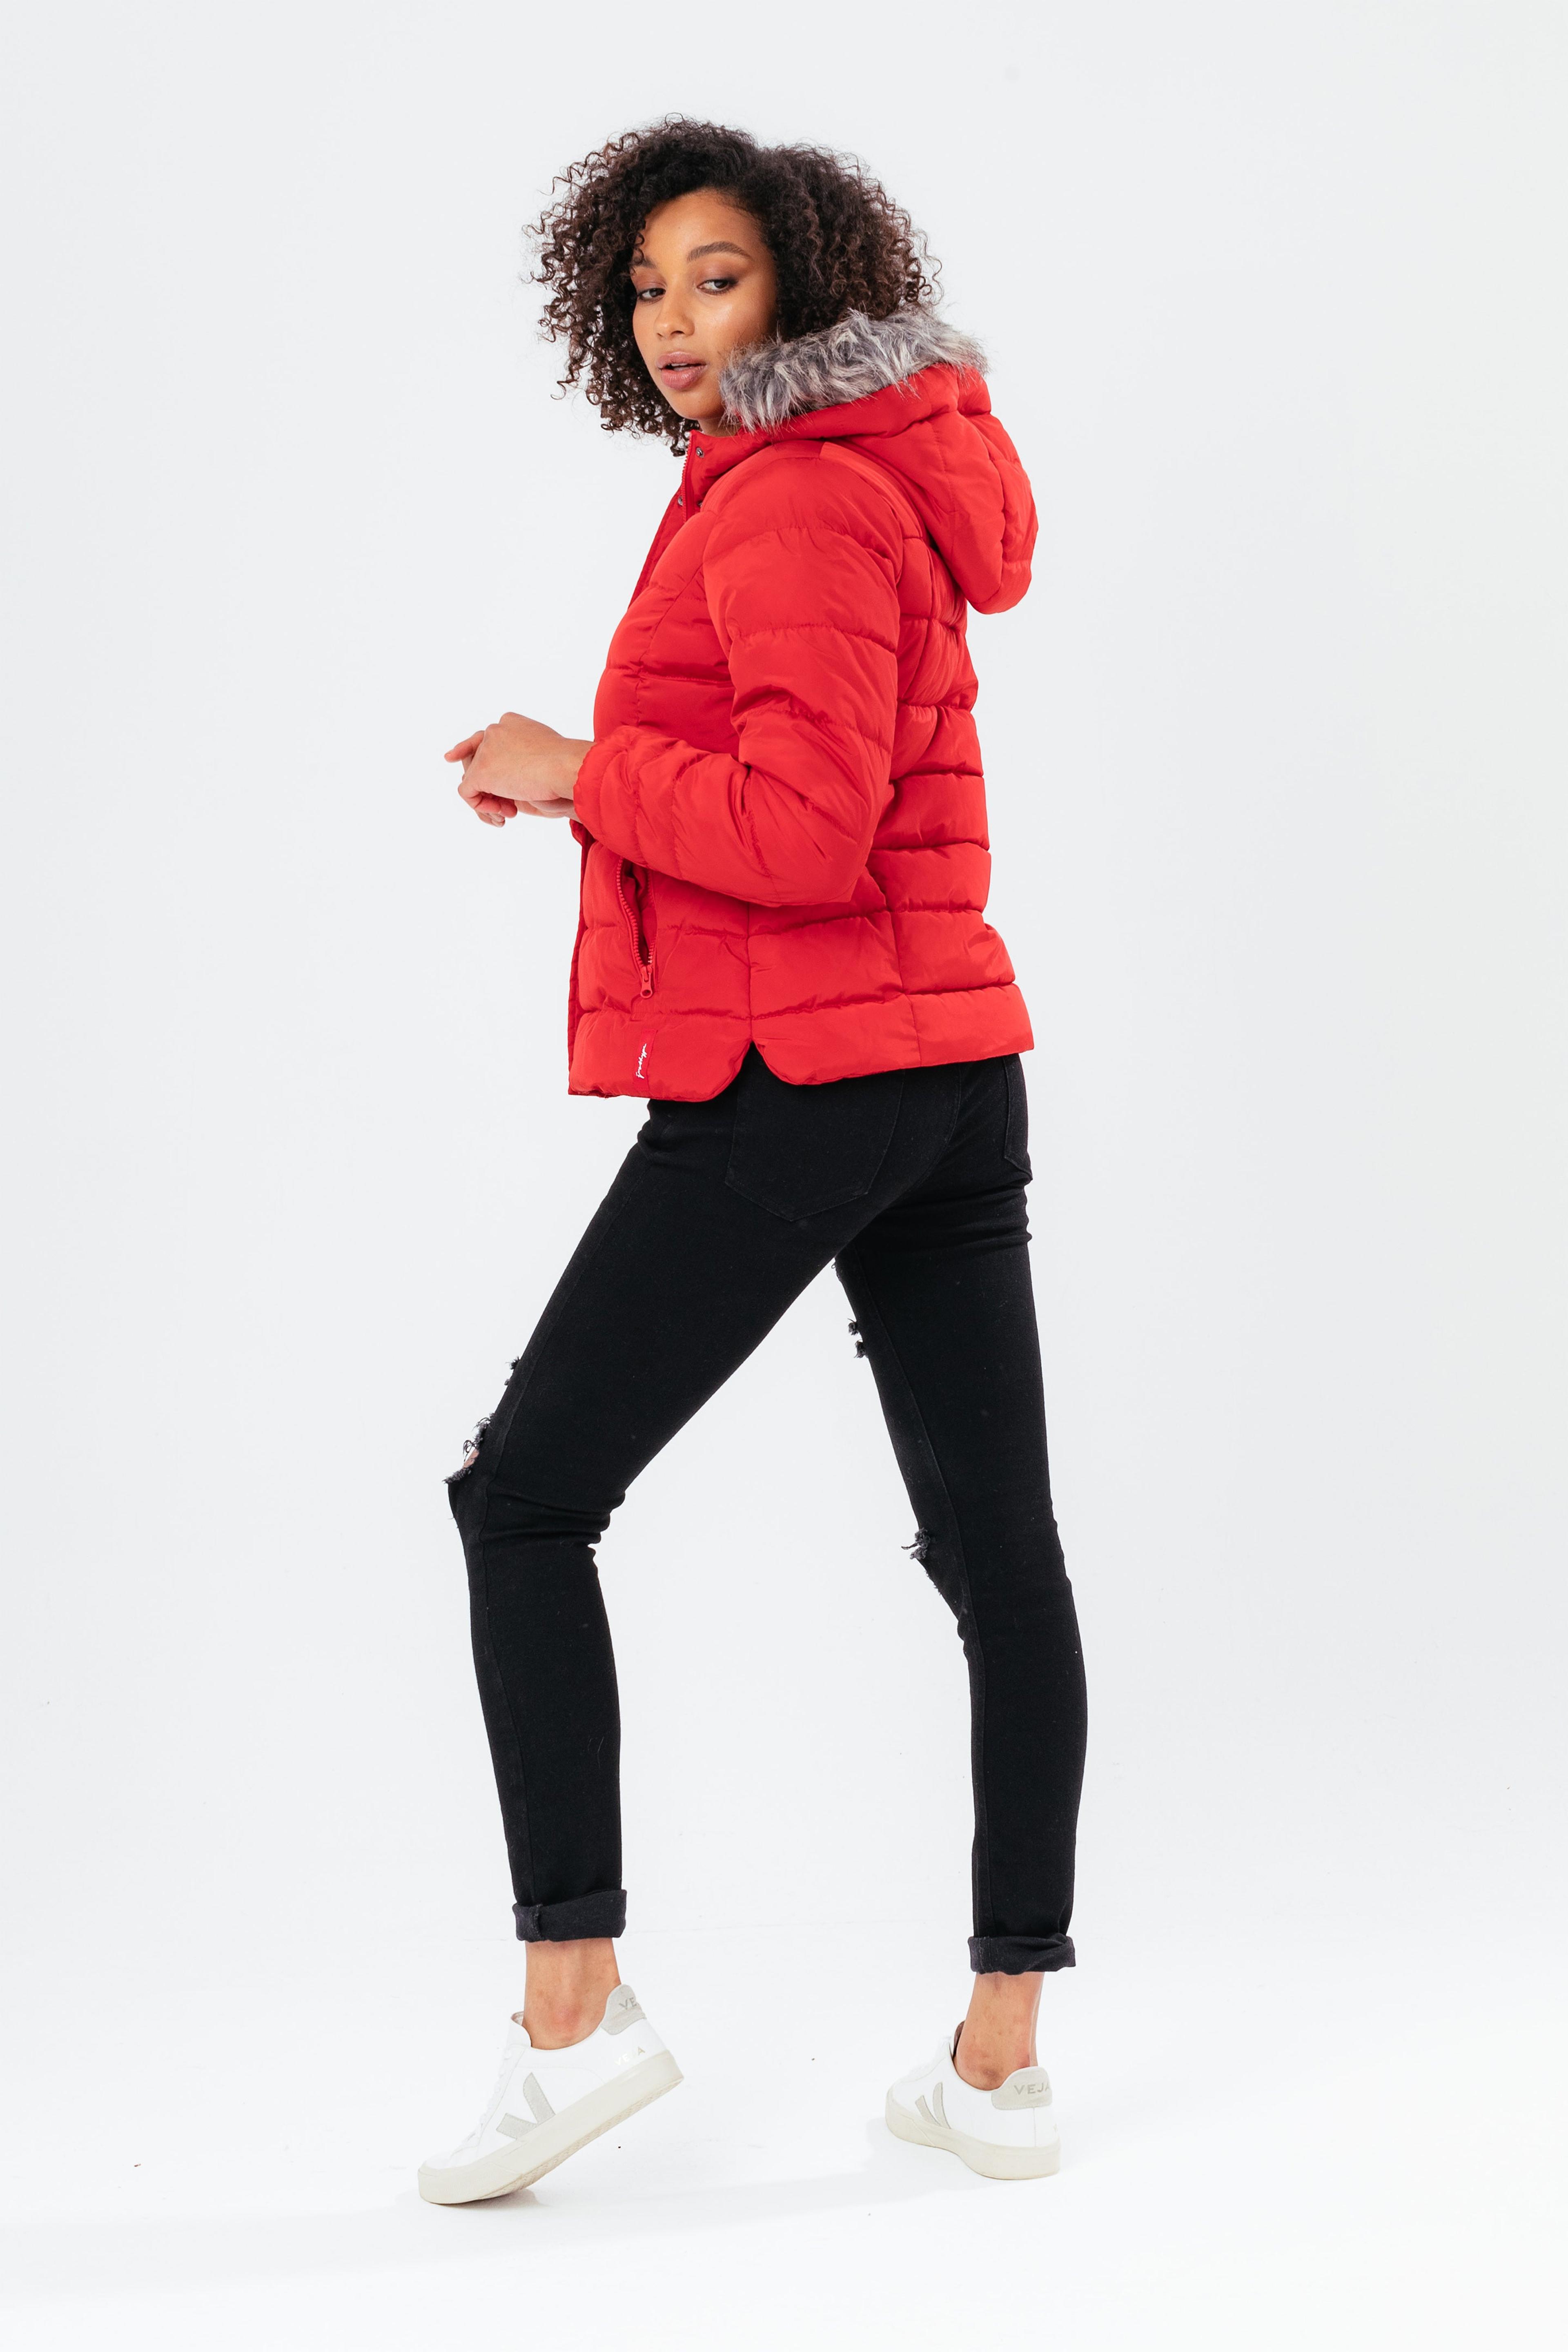 Alternate View 2 of HYPE RED SHORT LENGTH WOMEN'S PADDED COAT WITH FUR